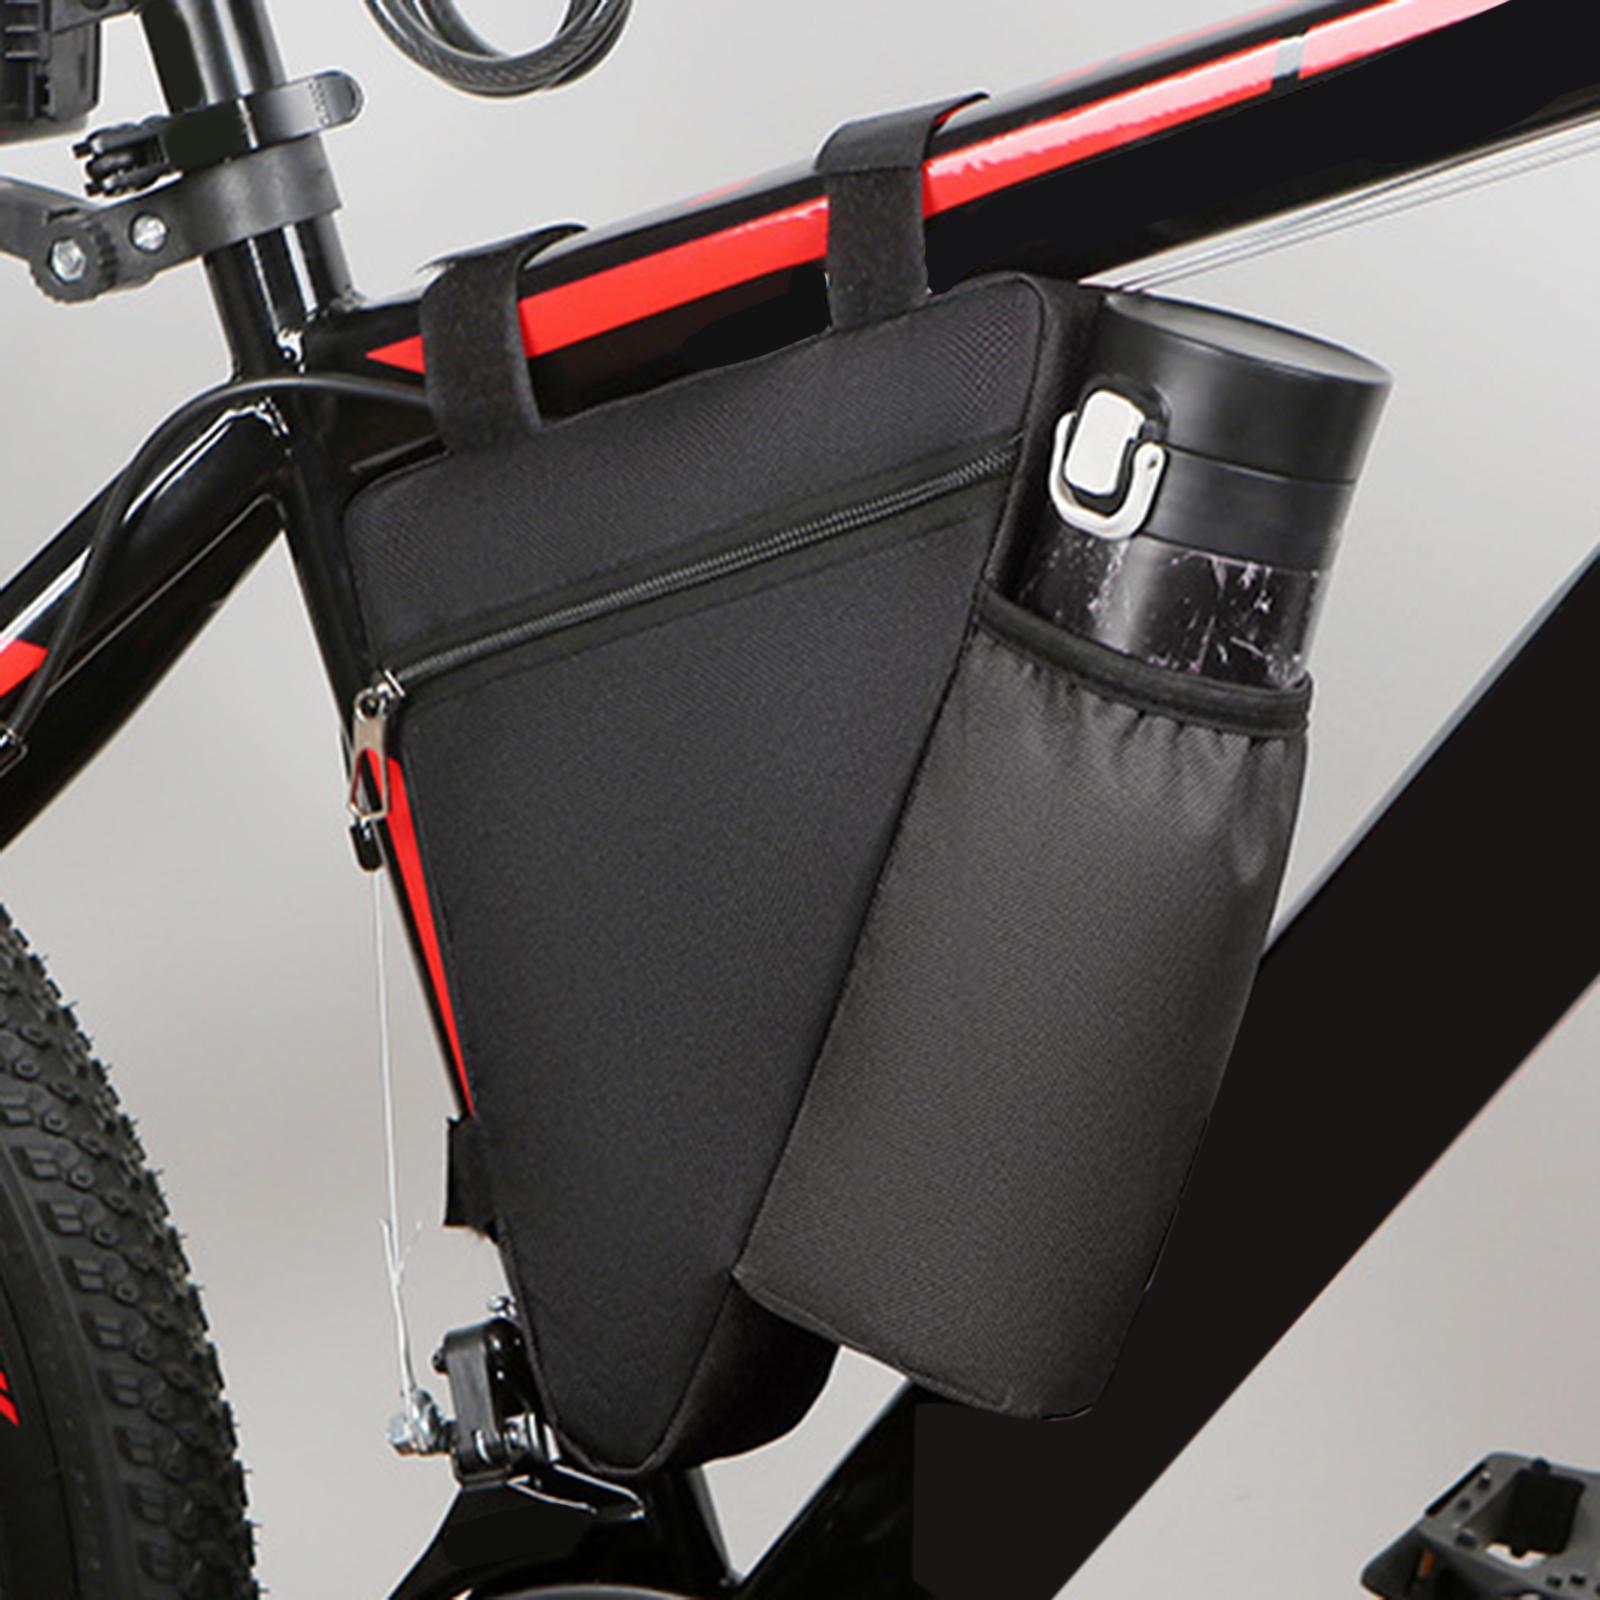 Bike Frame Pouch Lightweight Bike Storage Bag for Mountain Bikes Attachments Black with Bag